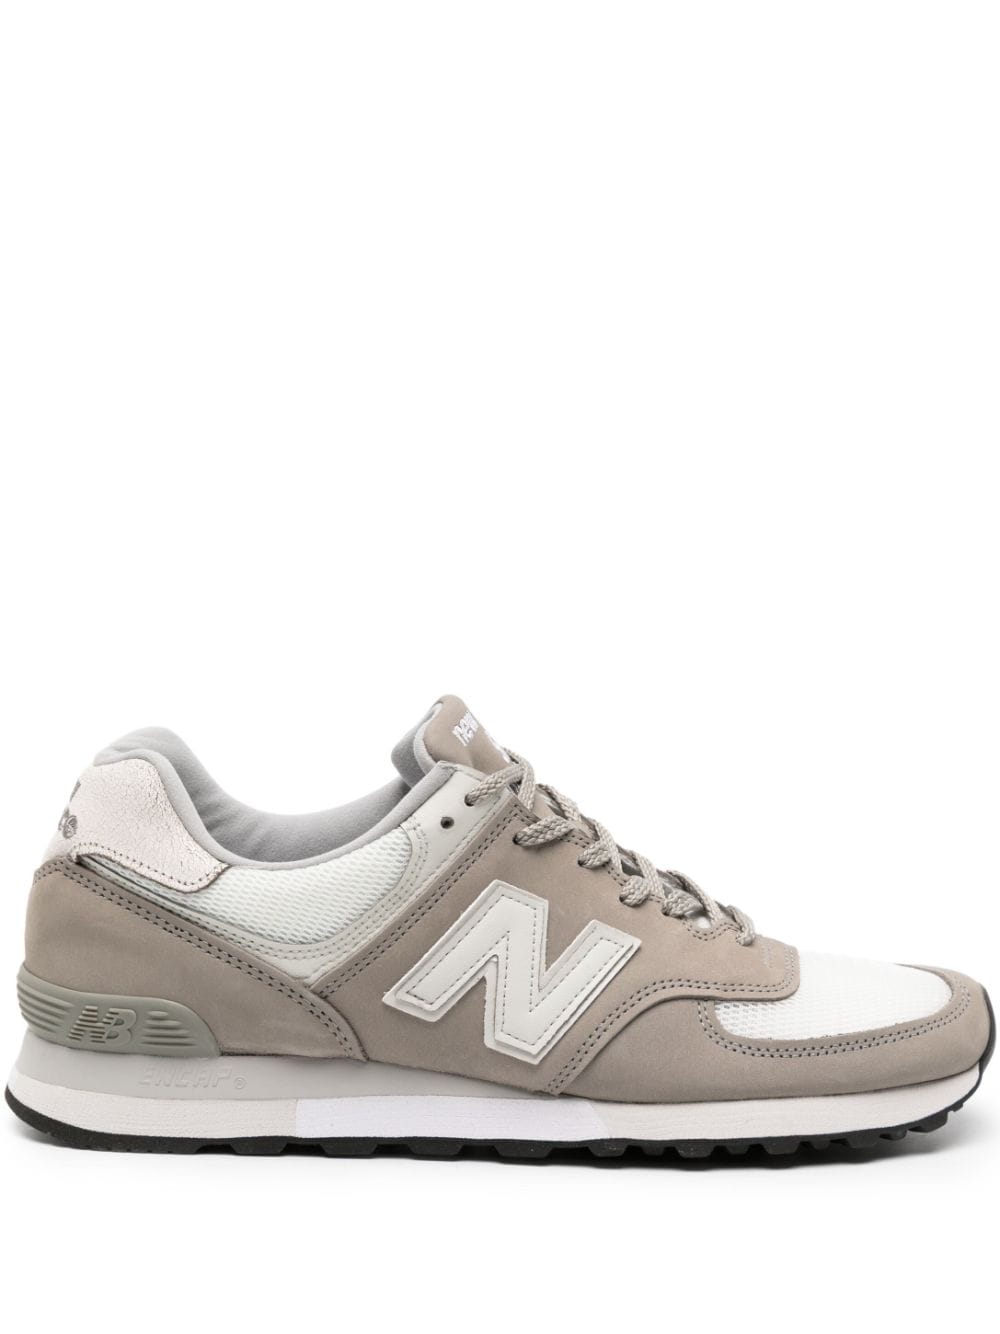 NEW BALANCE 576 MADE IN UK SNEAKERS